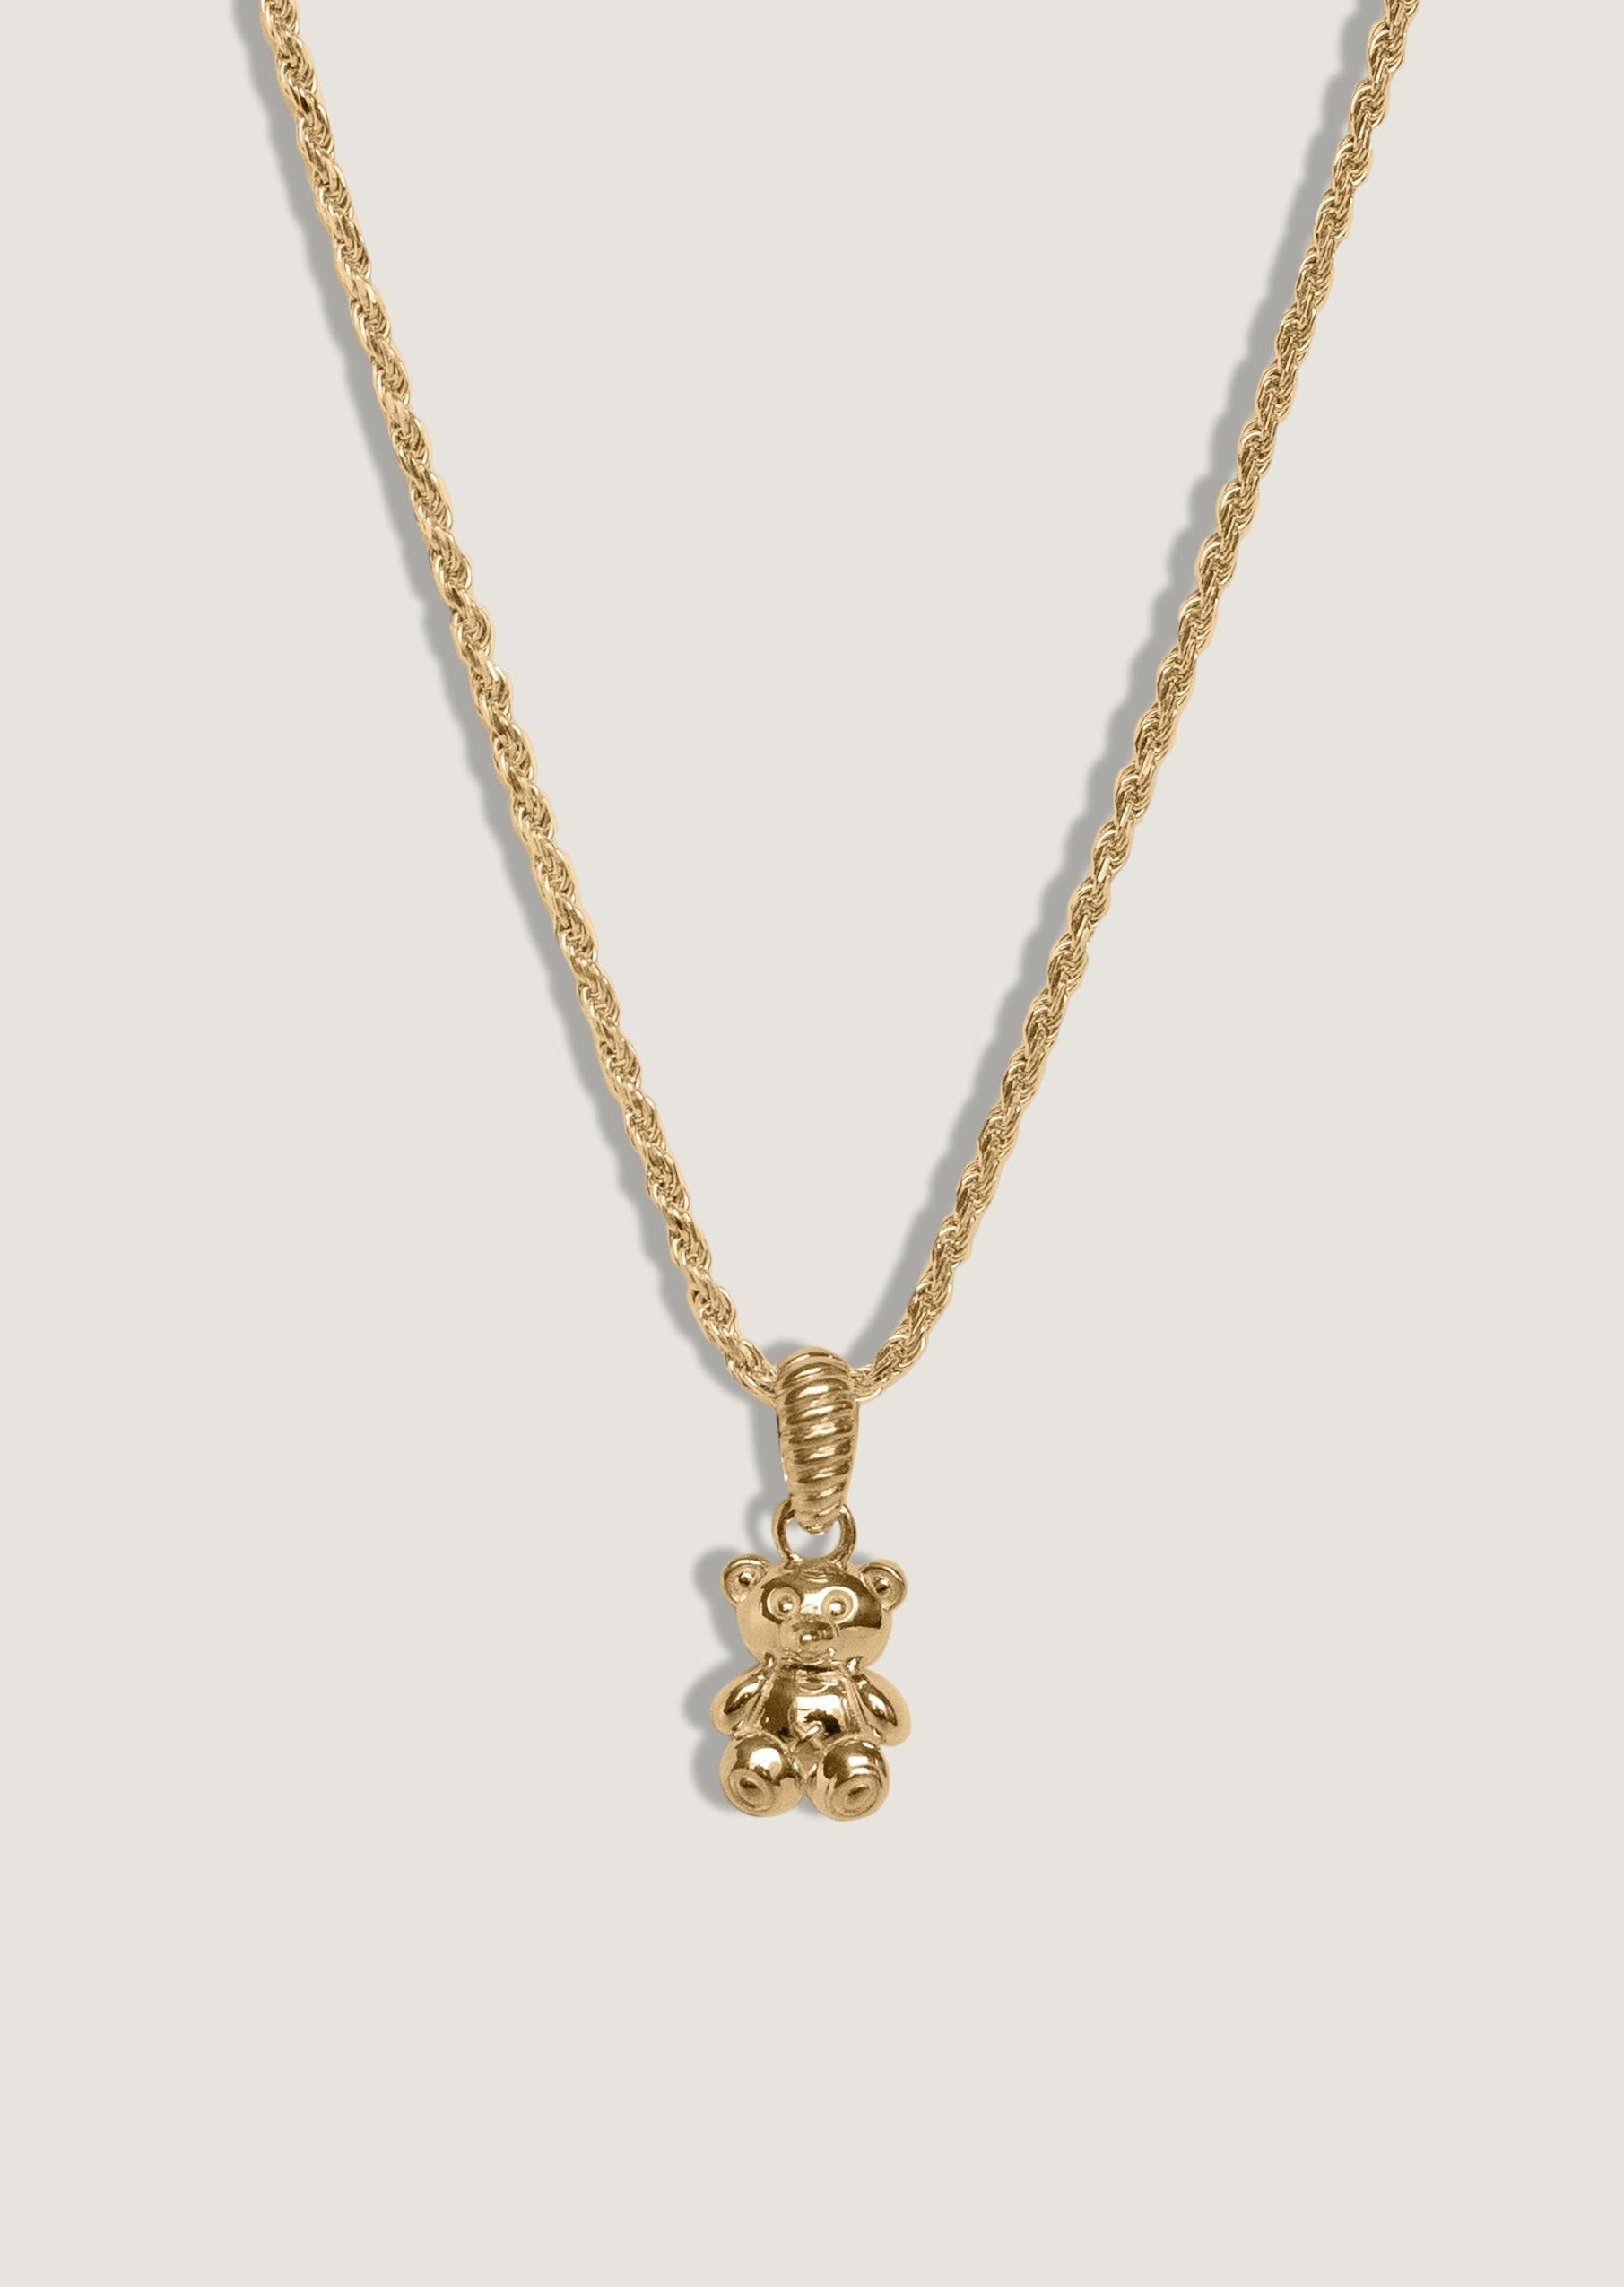 Oliver Teddy Bear Necklace Gold